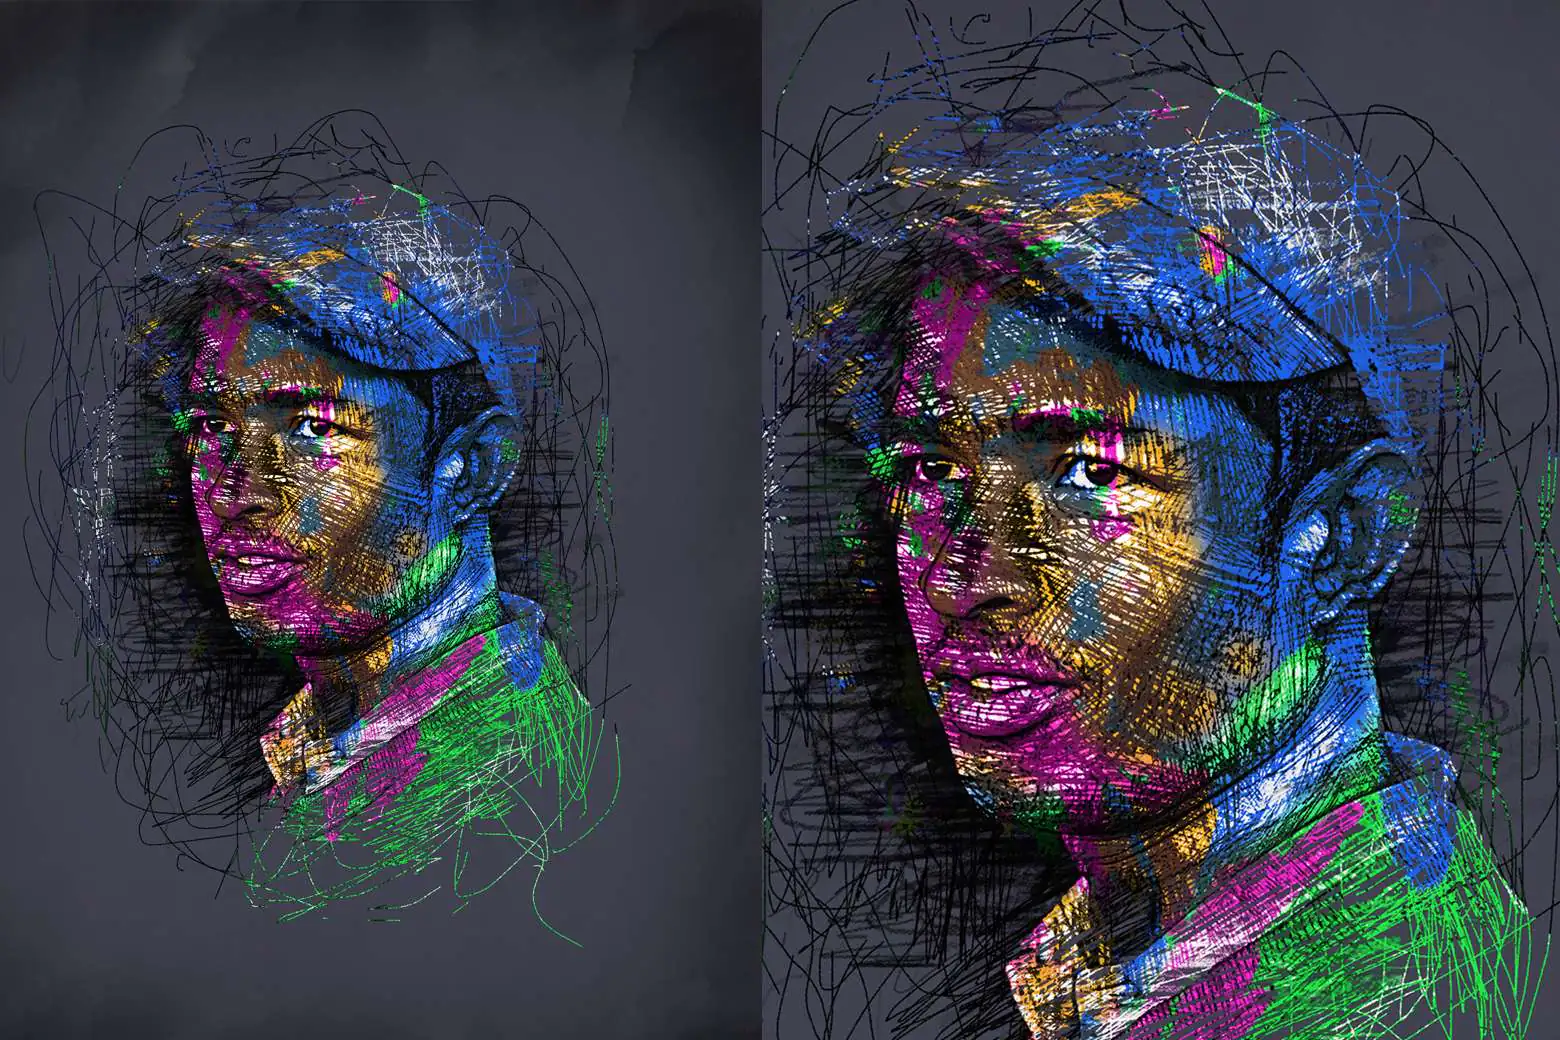 How To Turn Your Images Into Scribble Art